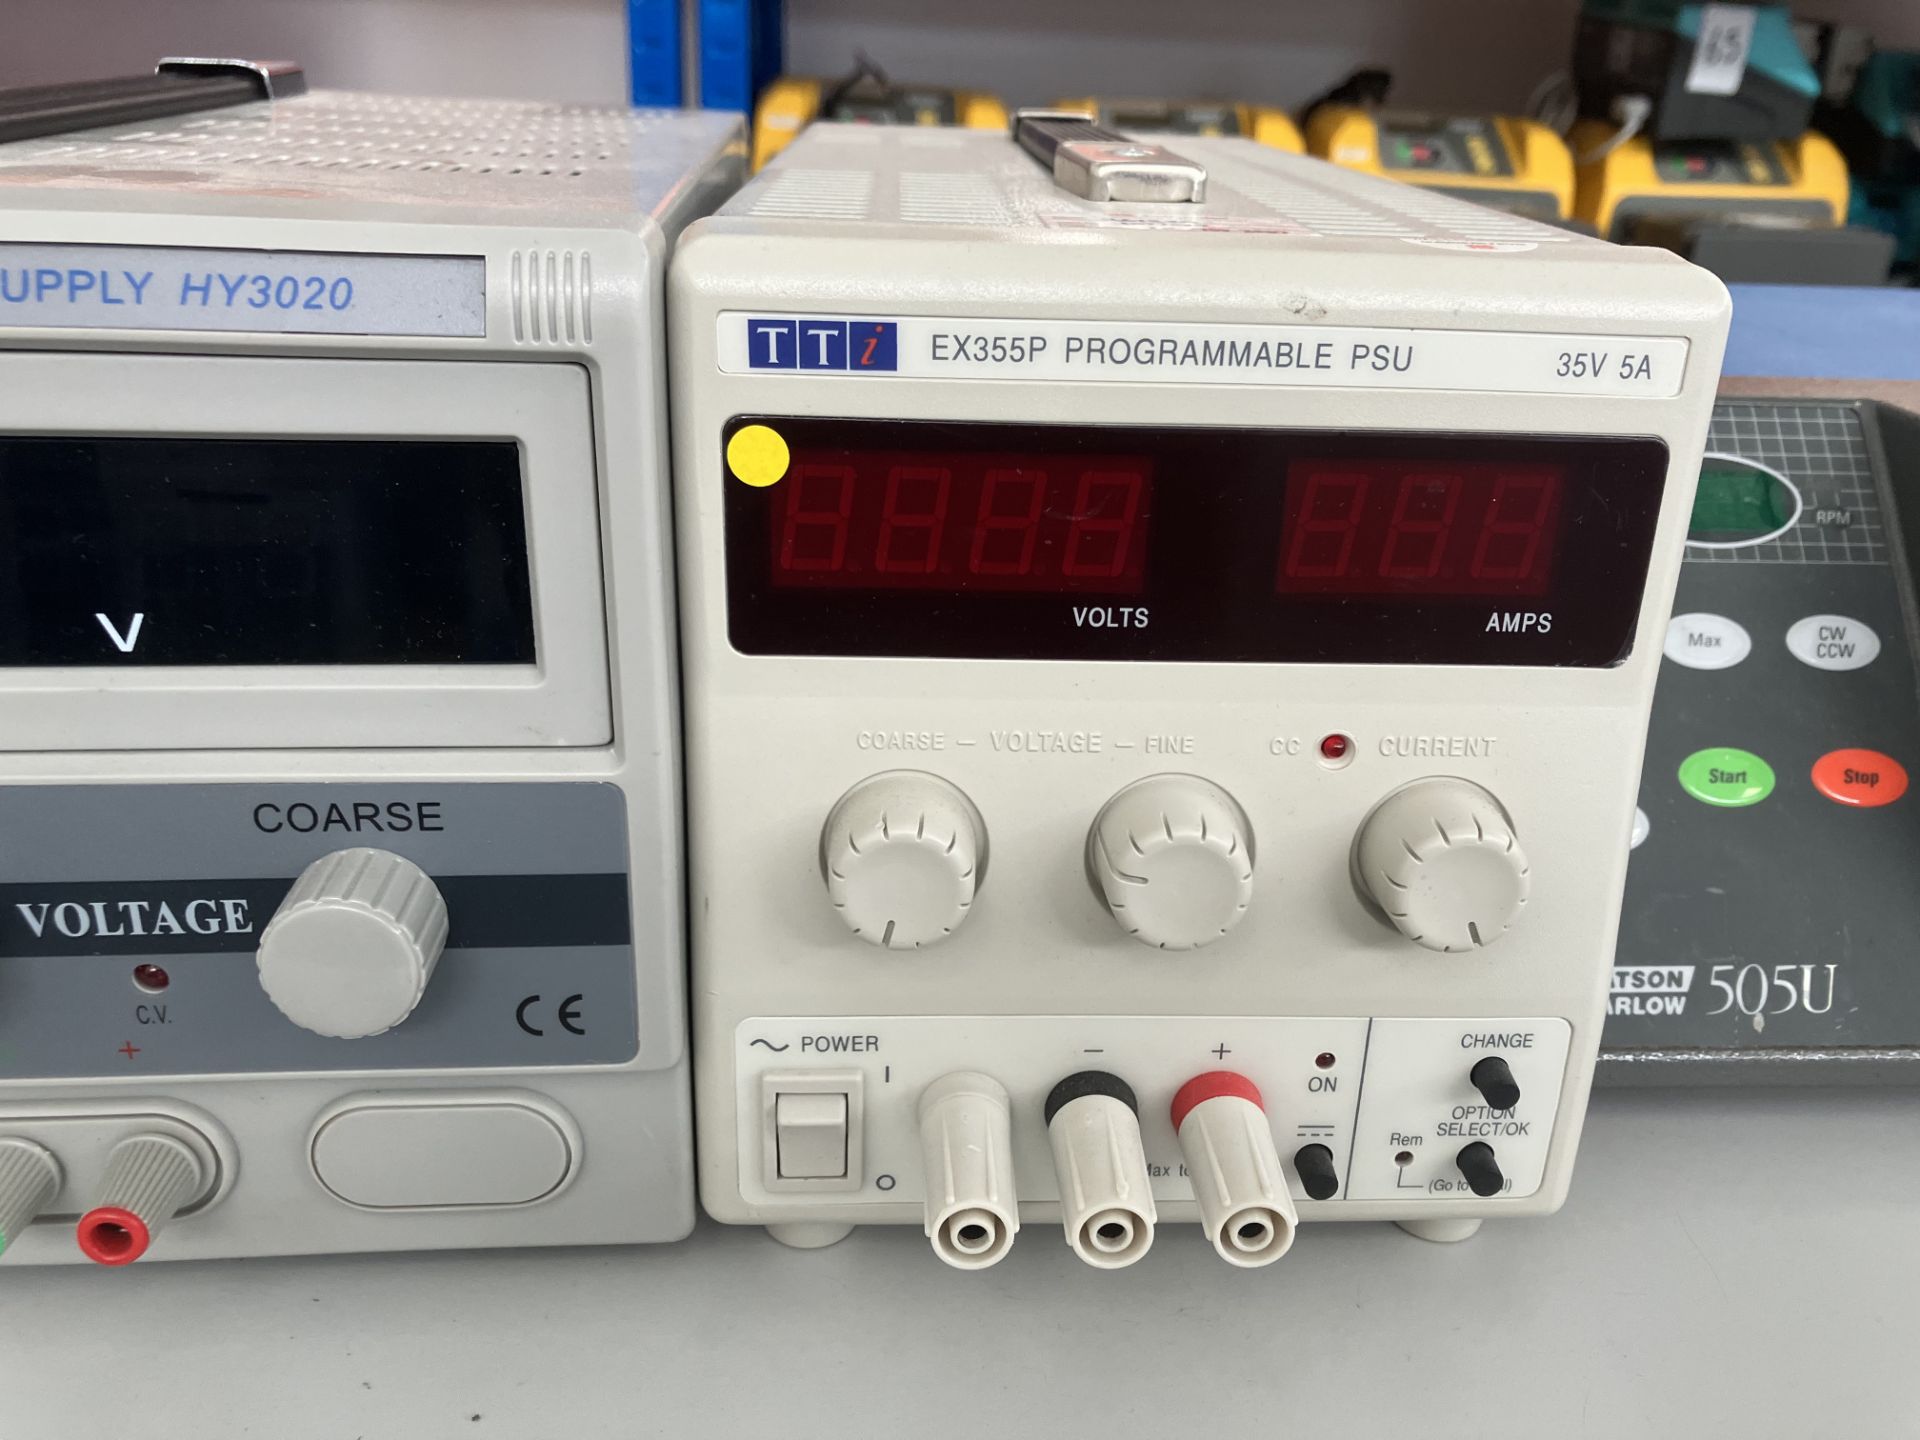 Watson Marlow 505u peristaltic pump with Tti EX355 programmable PSU and Digimess HY3020 DC power - Image 5 of 5